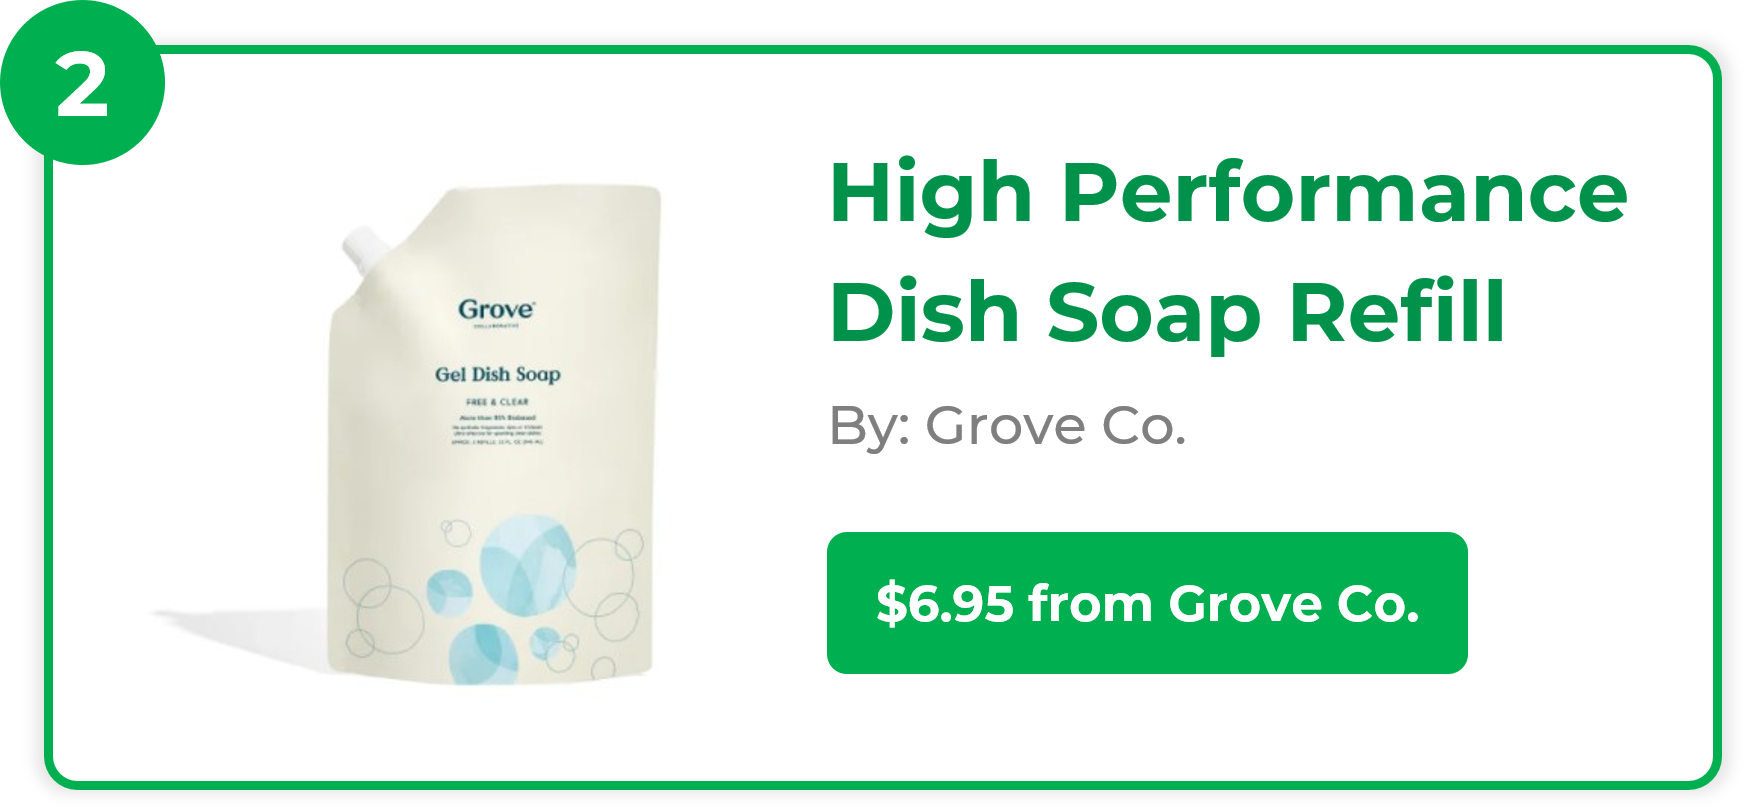 High Performance Dish Soap Refill - Grove Co.